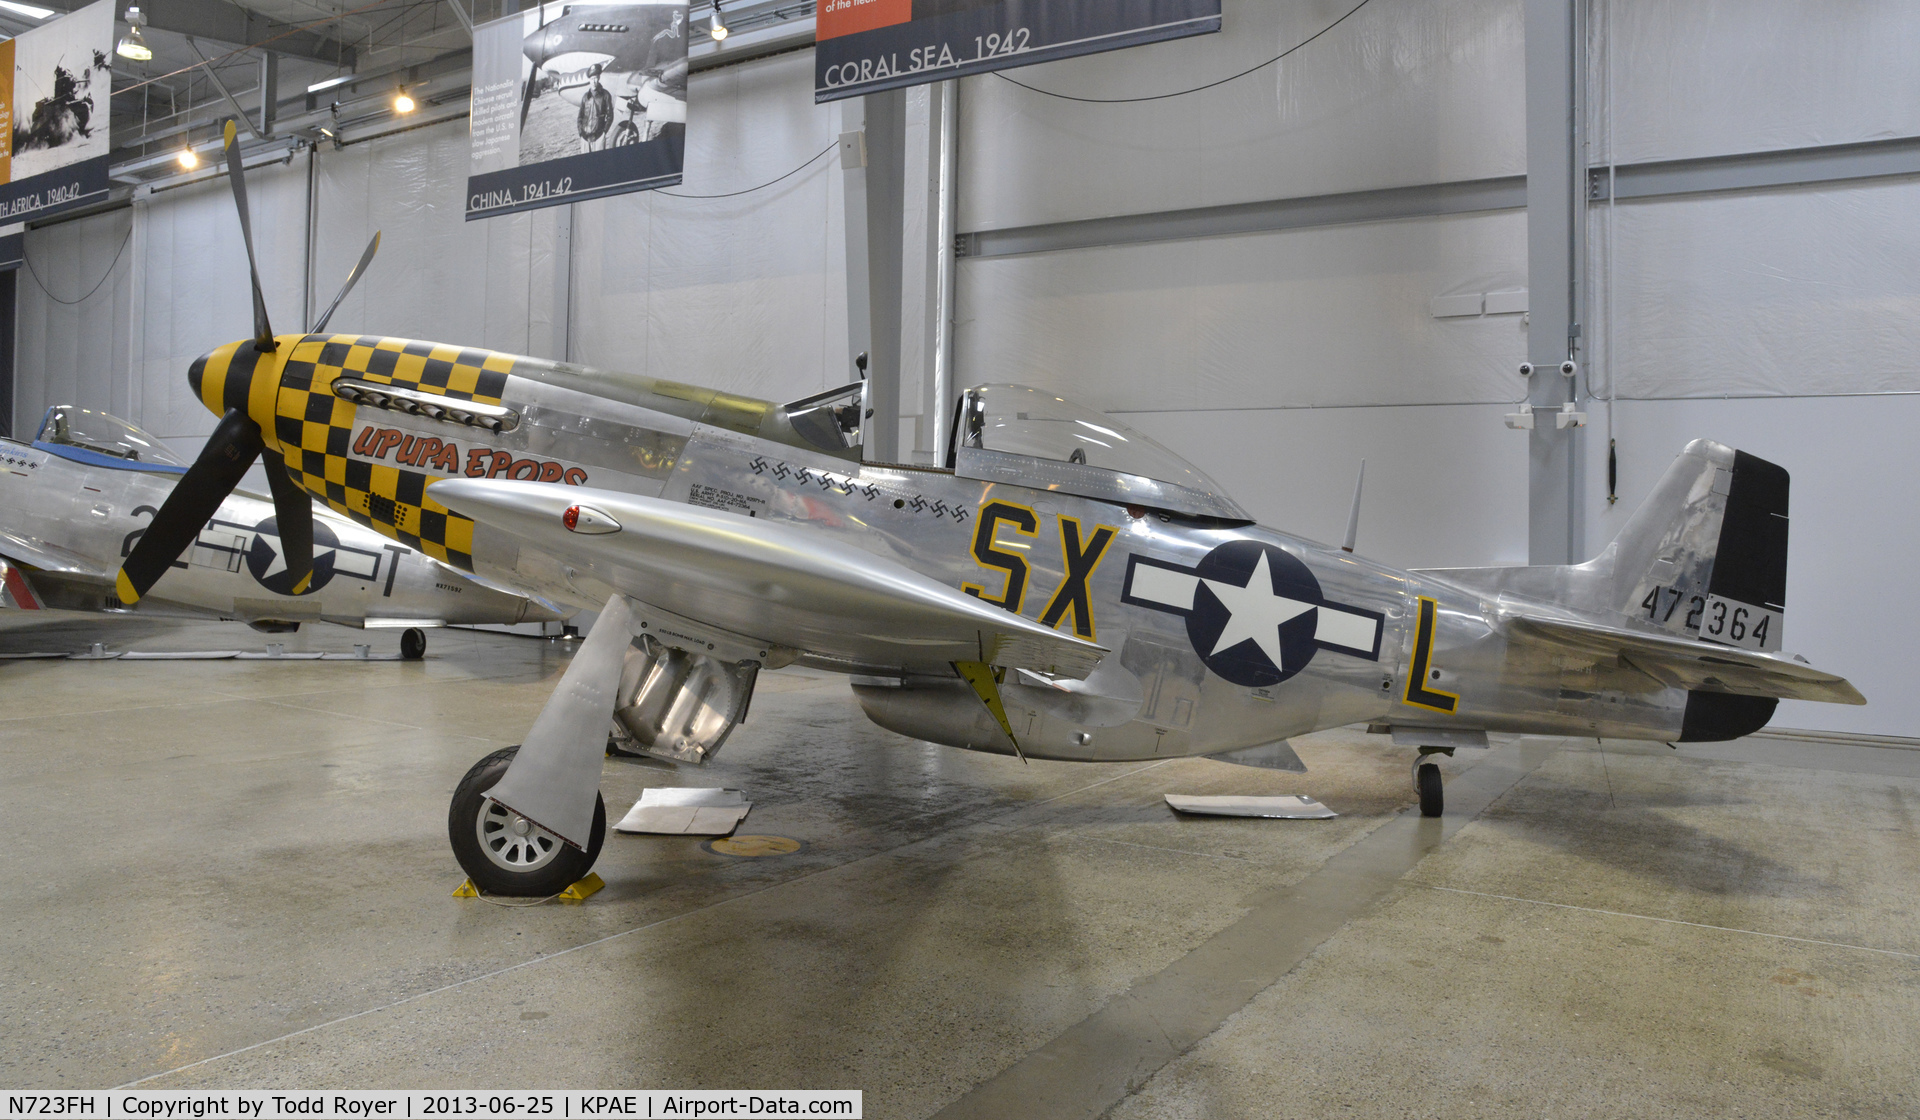 N723FH, 1944 North American P-51D Mustang C/N 44-72364, Part of the Flying Heritage Collection